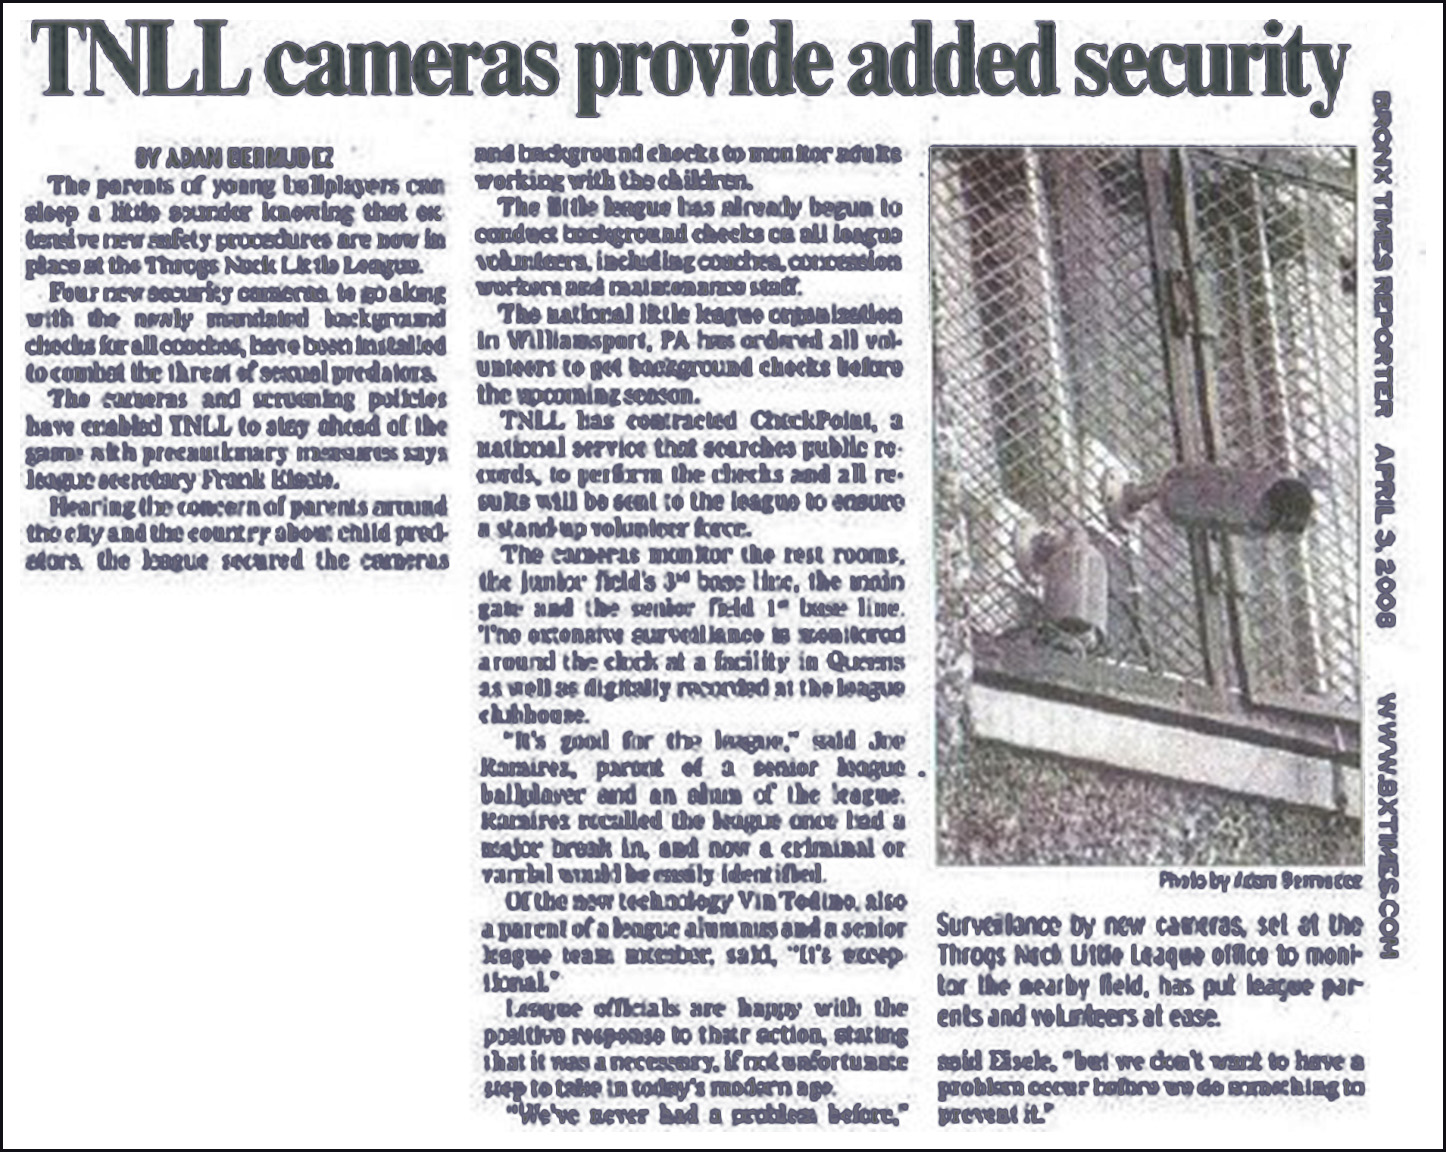 Throgs Neck Little League Cameras Provide Added Security